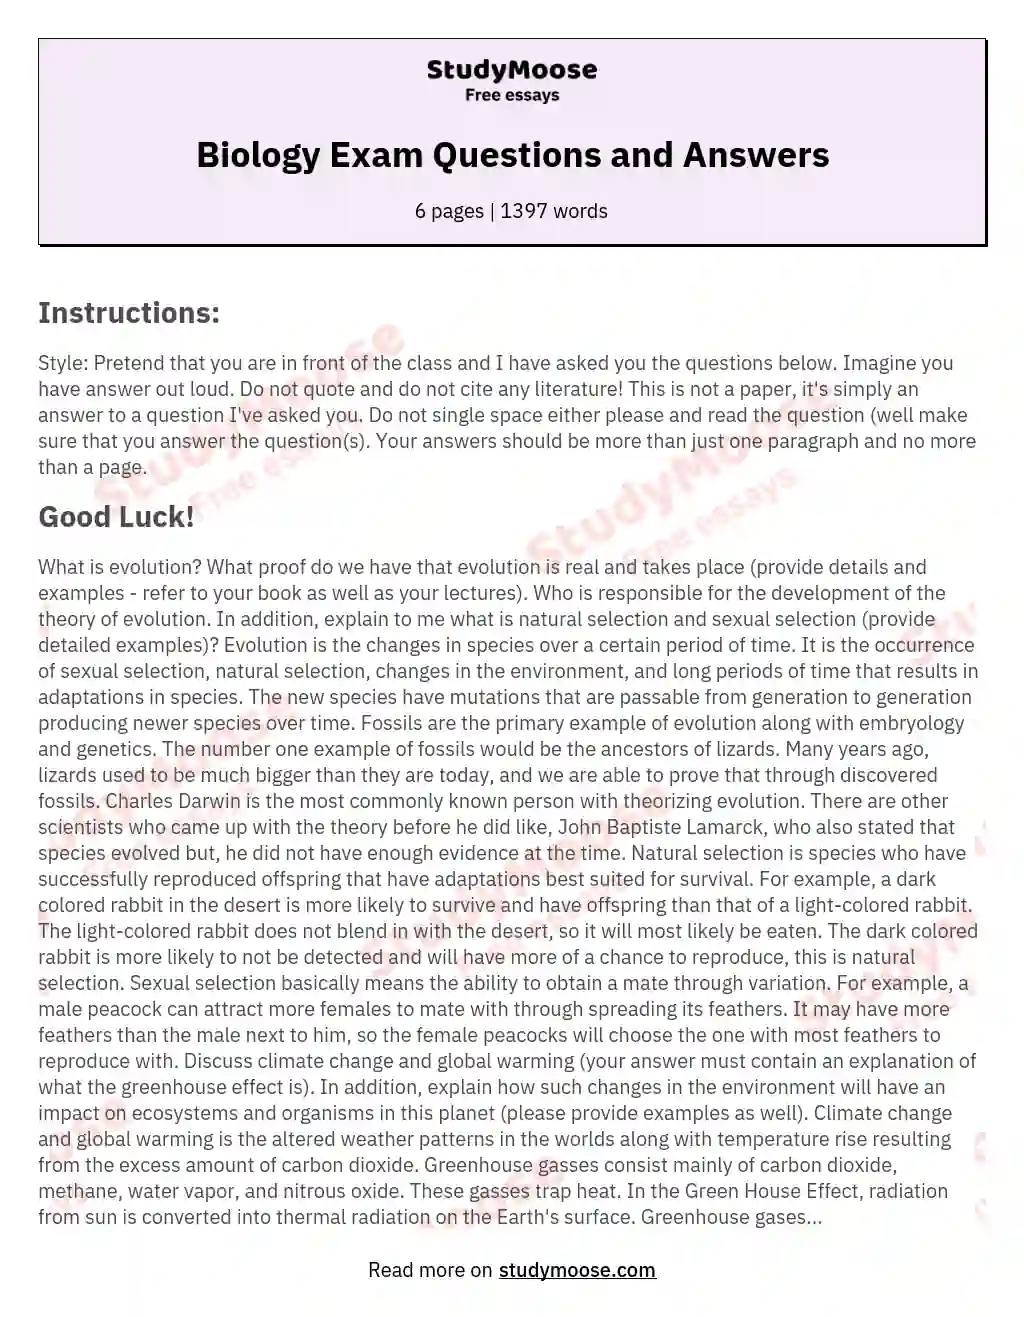 Biology Exam Questions and Answers essay